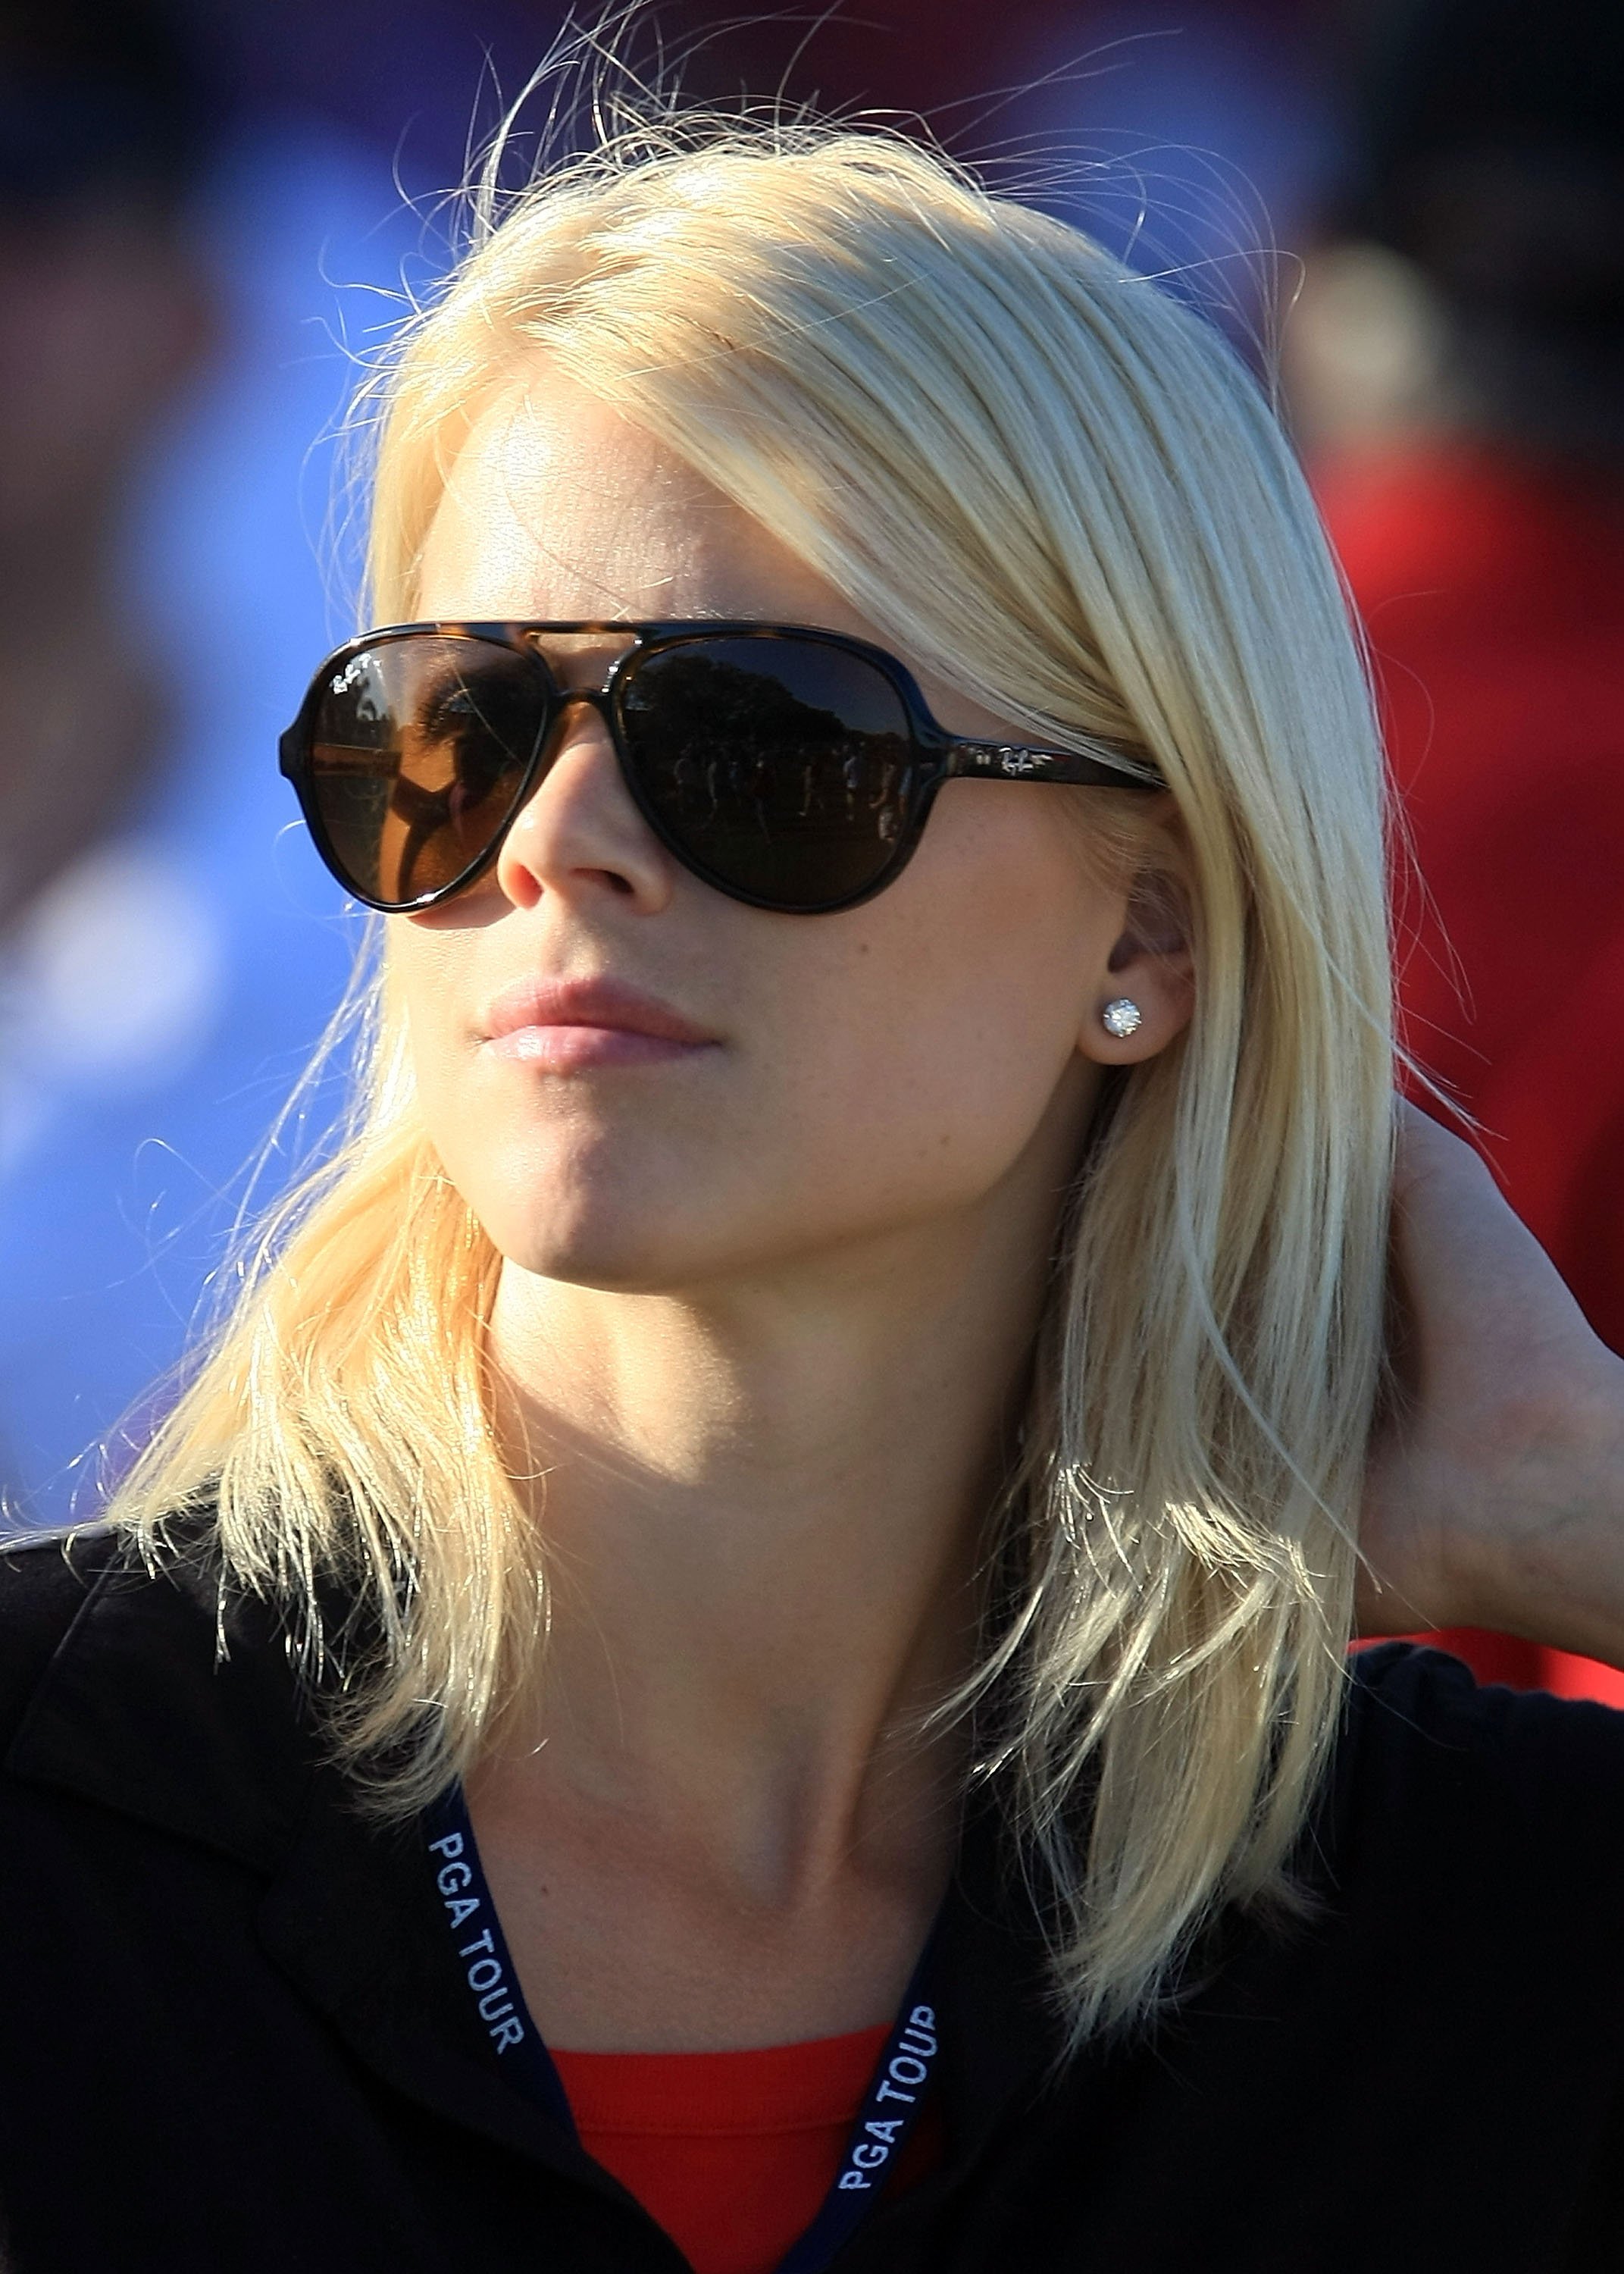 Elin Nordegren watching her husband Tiger Woods playing during the final round of the Arnold Palmer Invitational at the Bay Hill Club & Lodge on March 29, 2009 in Orlando, Florida. | Source: Getty Images